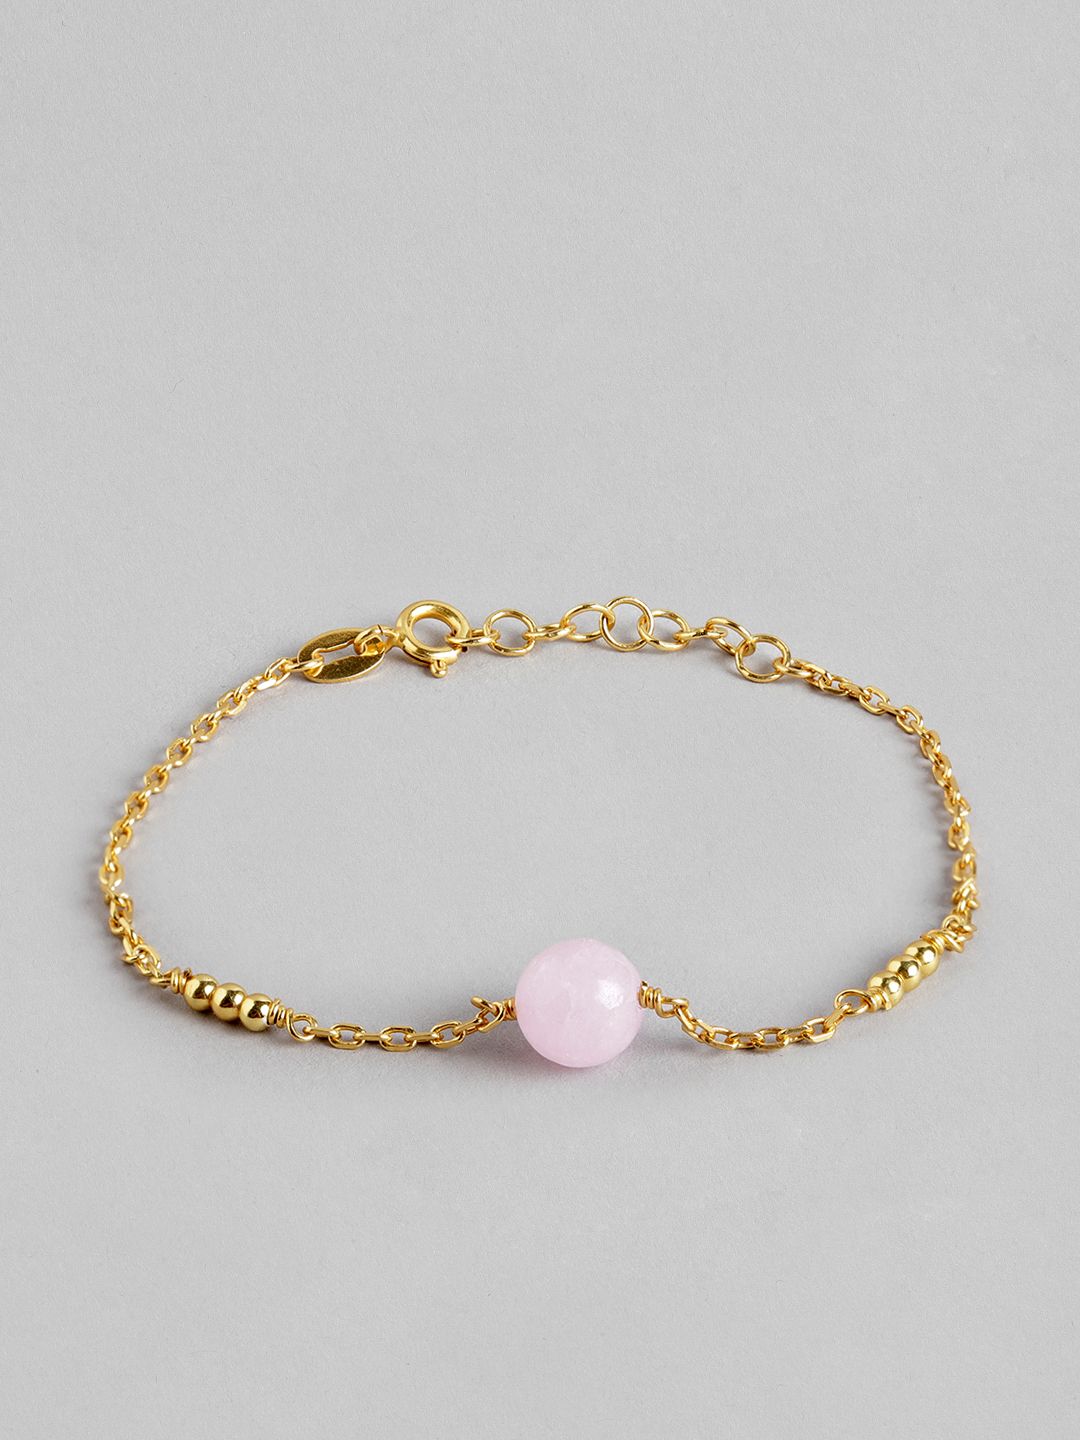 Carlton London Gold-Plated Pink Opal Studded Handcrafted Bracelet Price in India